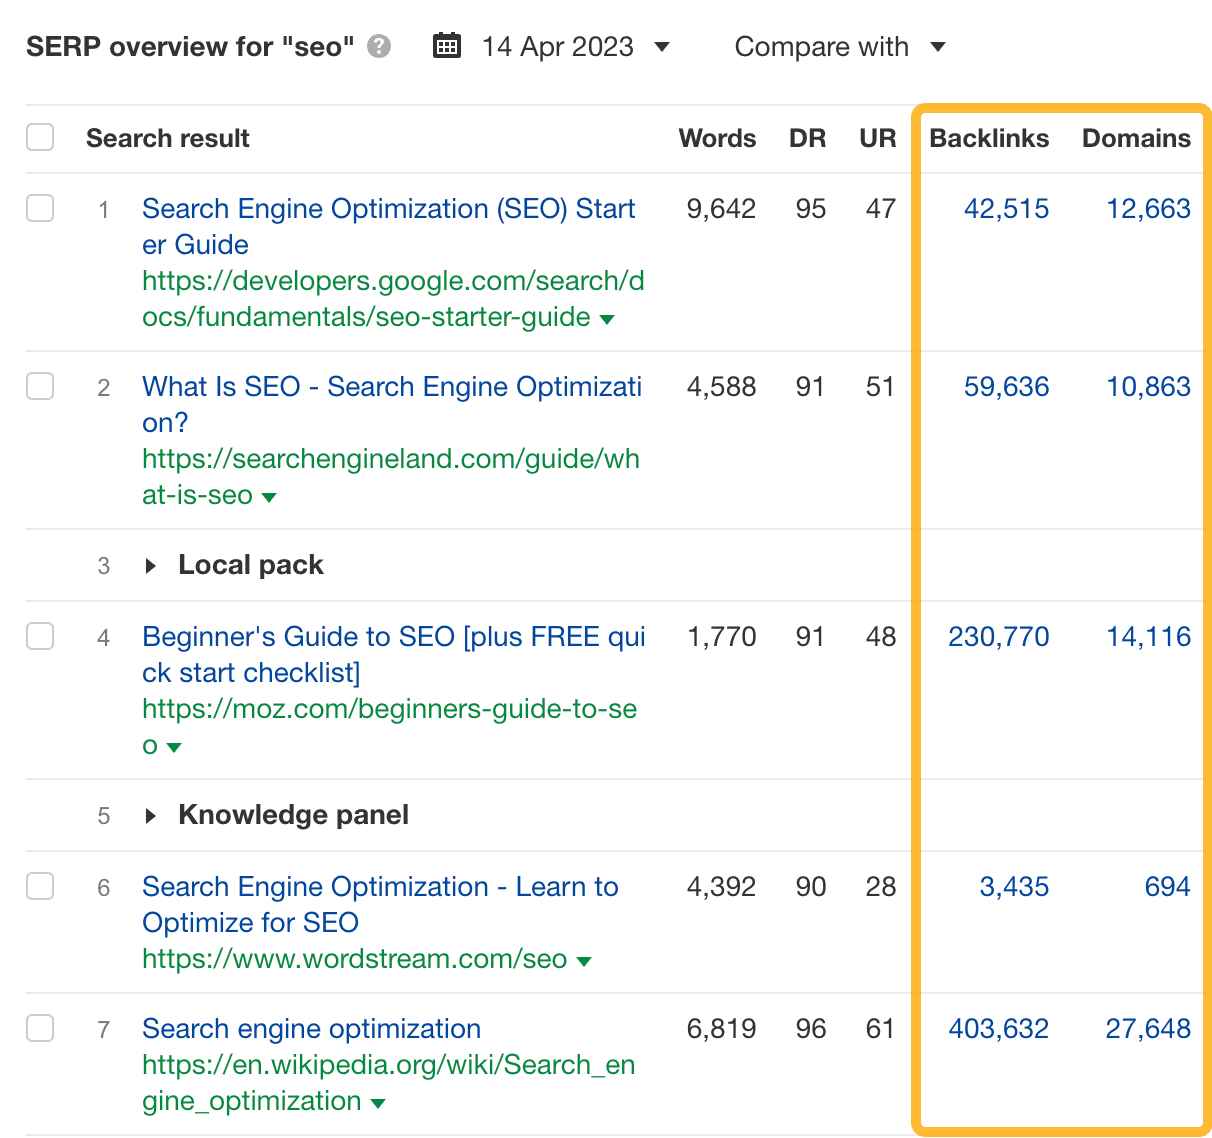 The top-ranking pages for "seo" have tons of referring domains